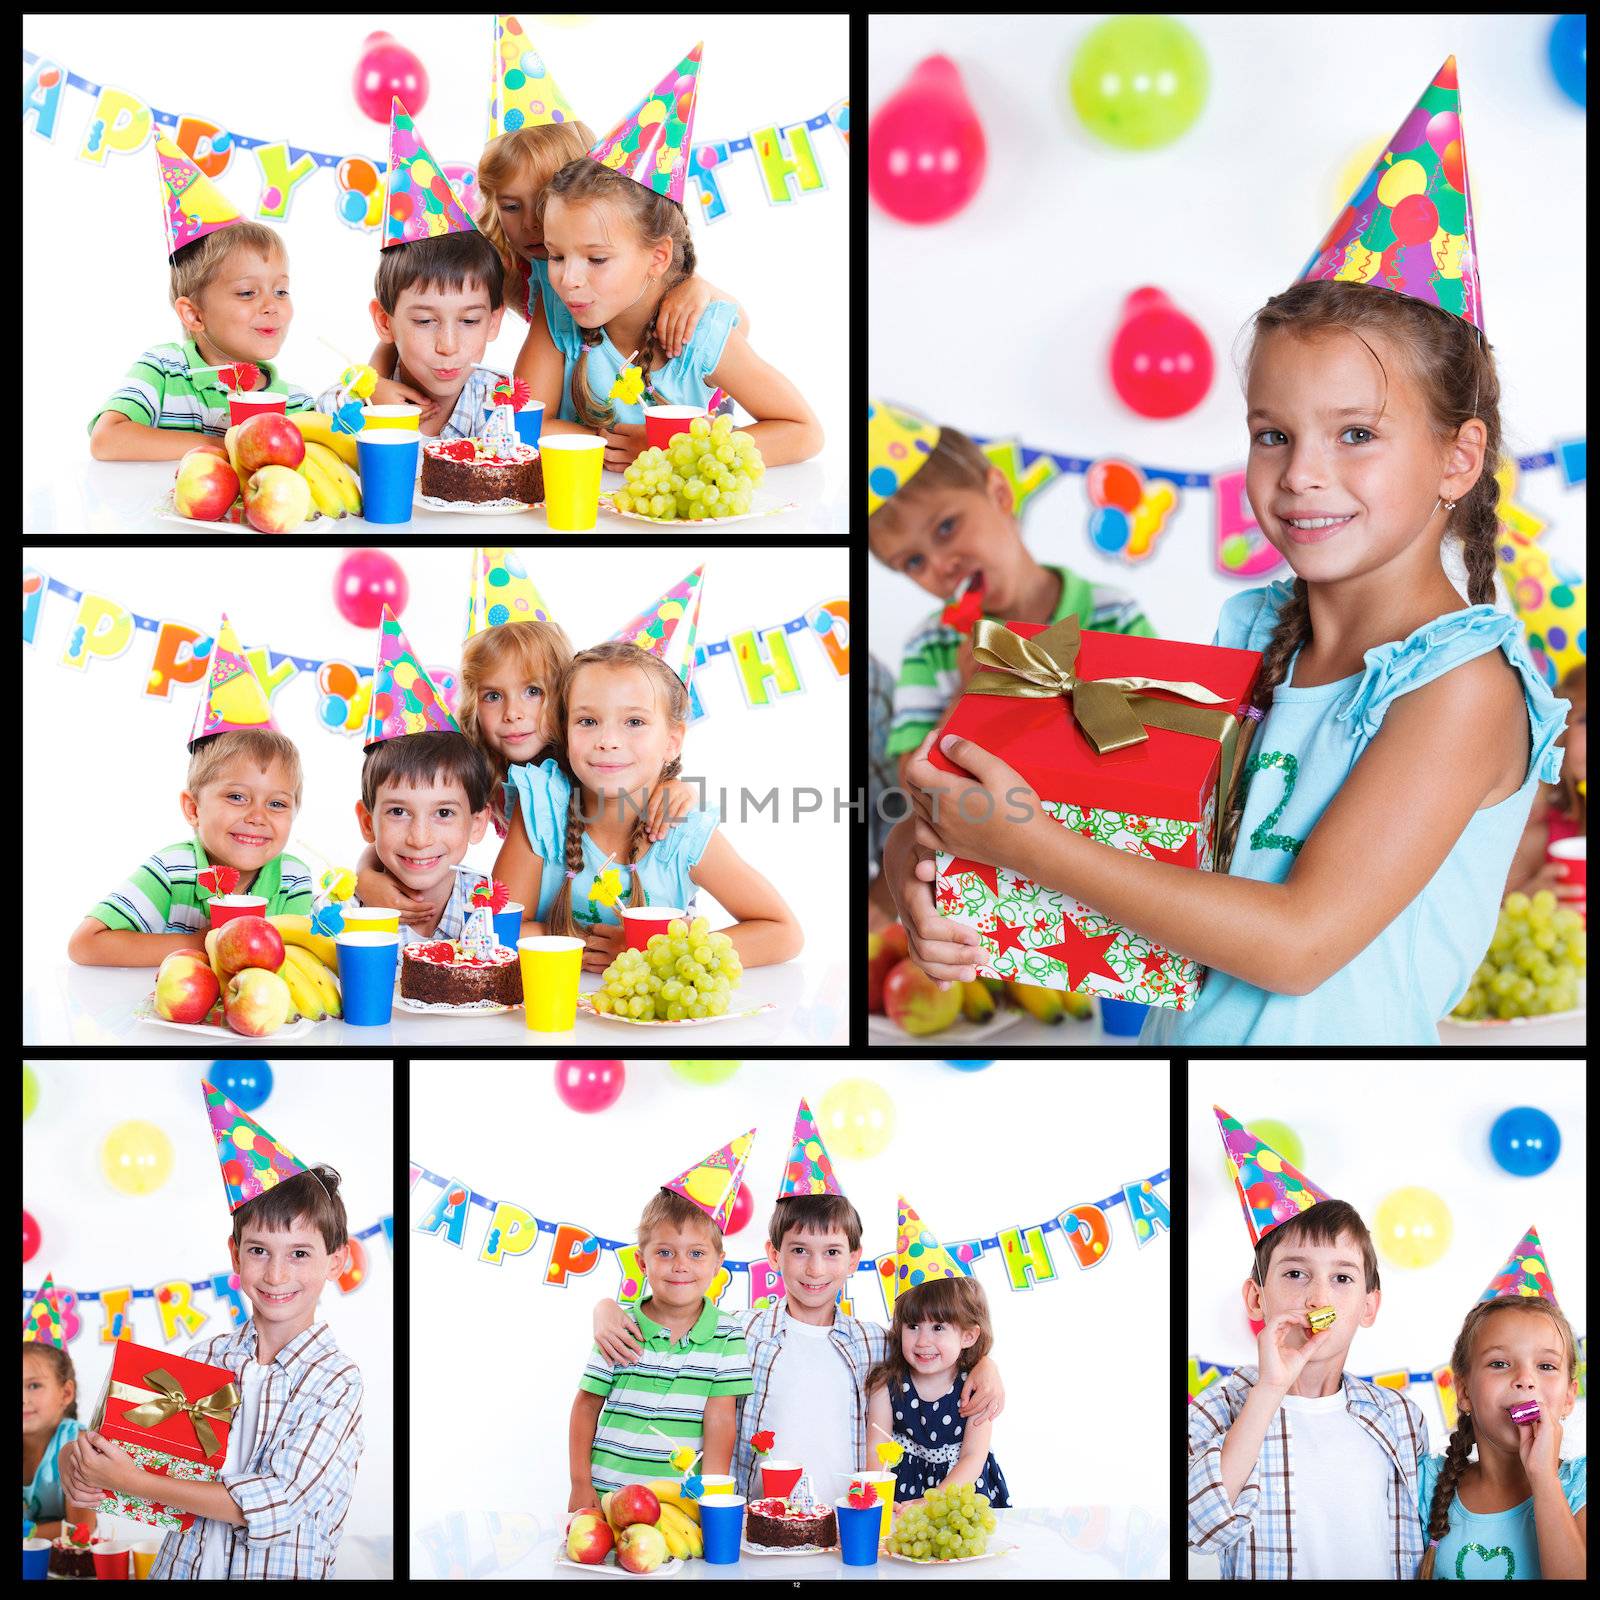 Collage of images group of adorable kids having fun at birthday party with birthday cake